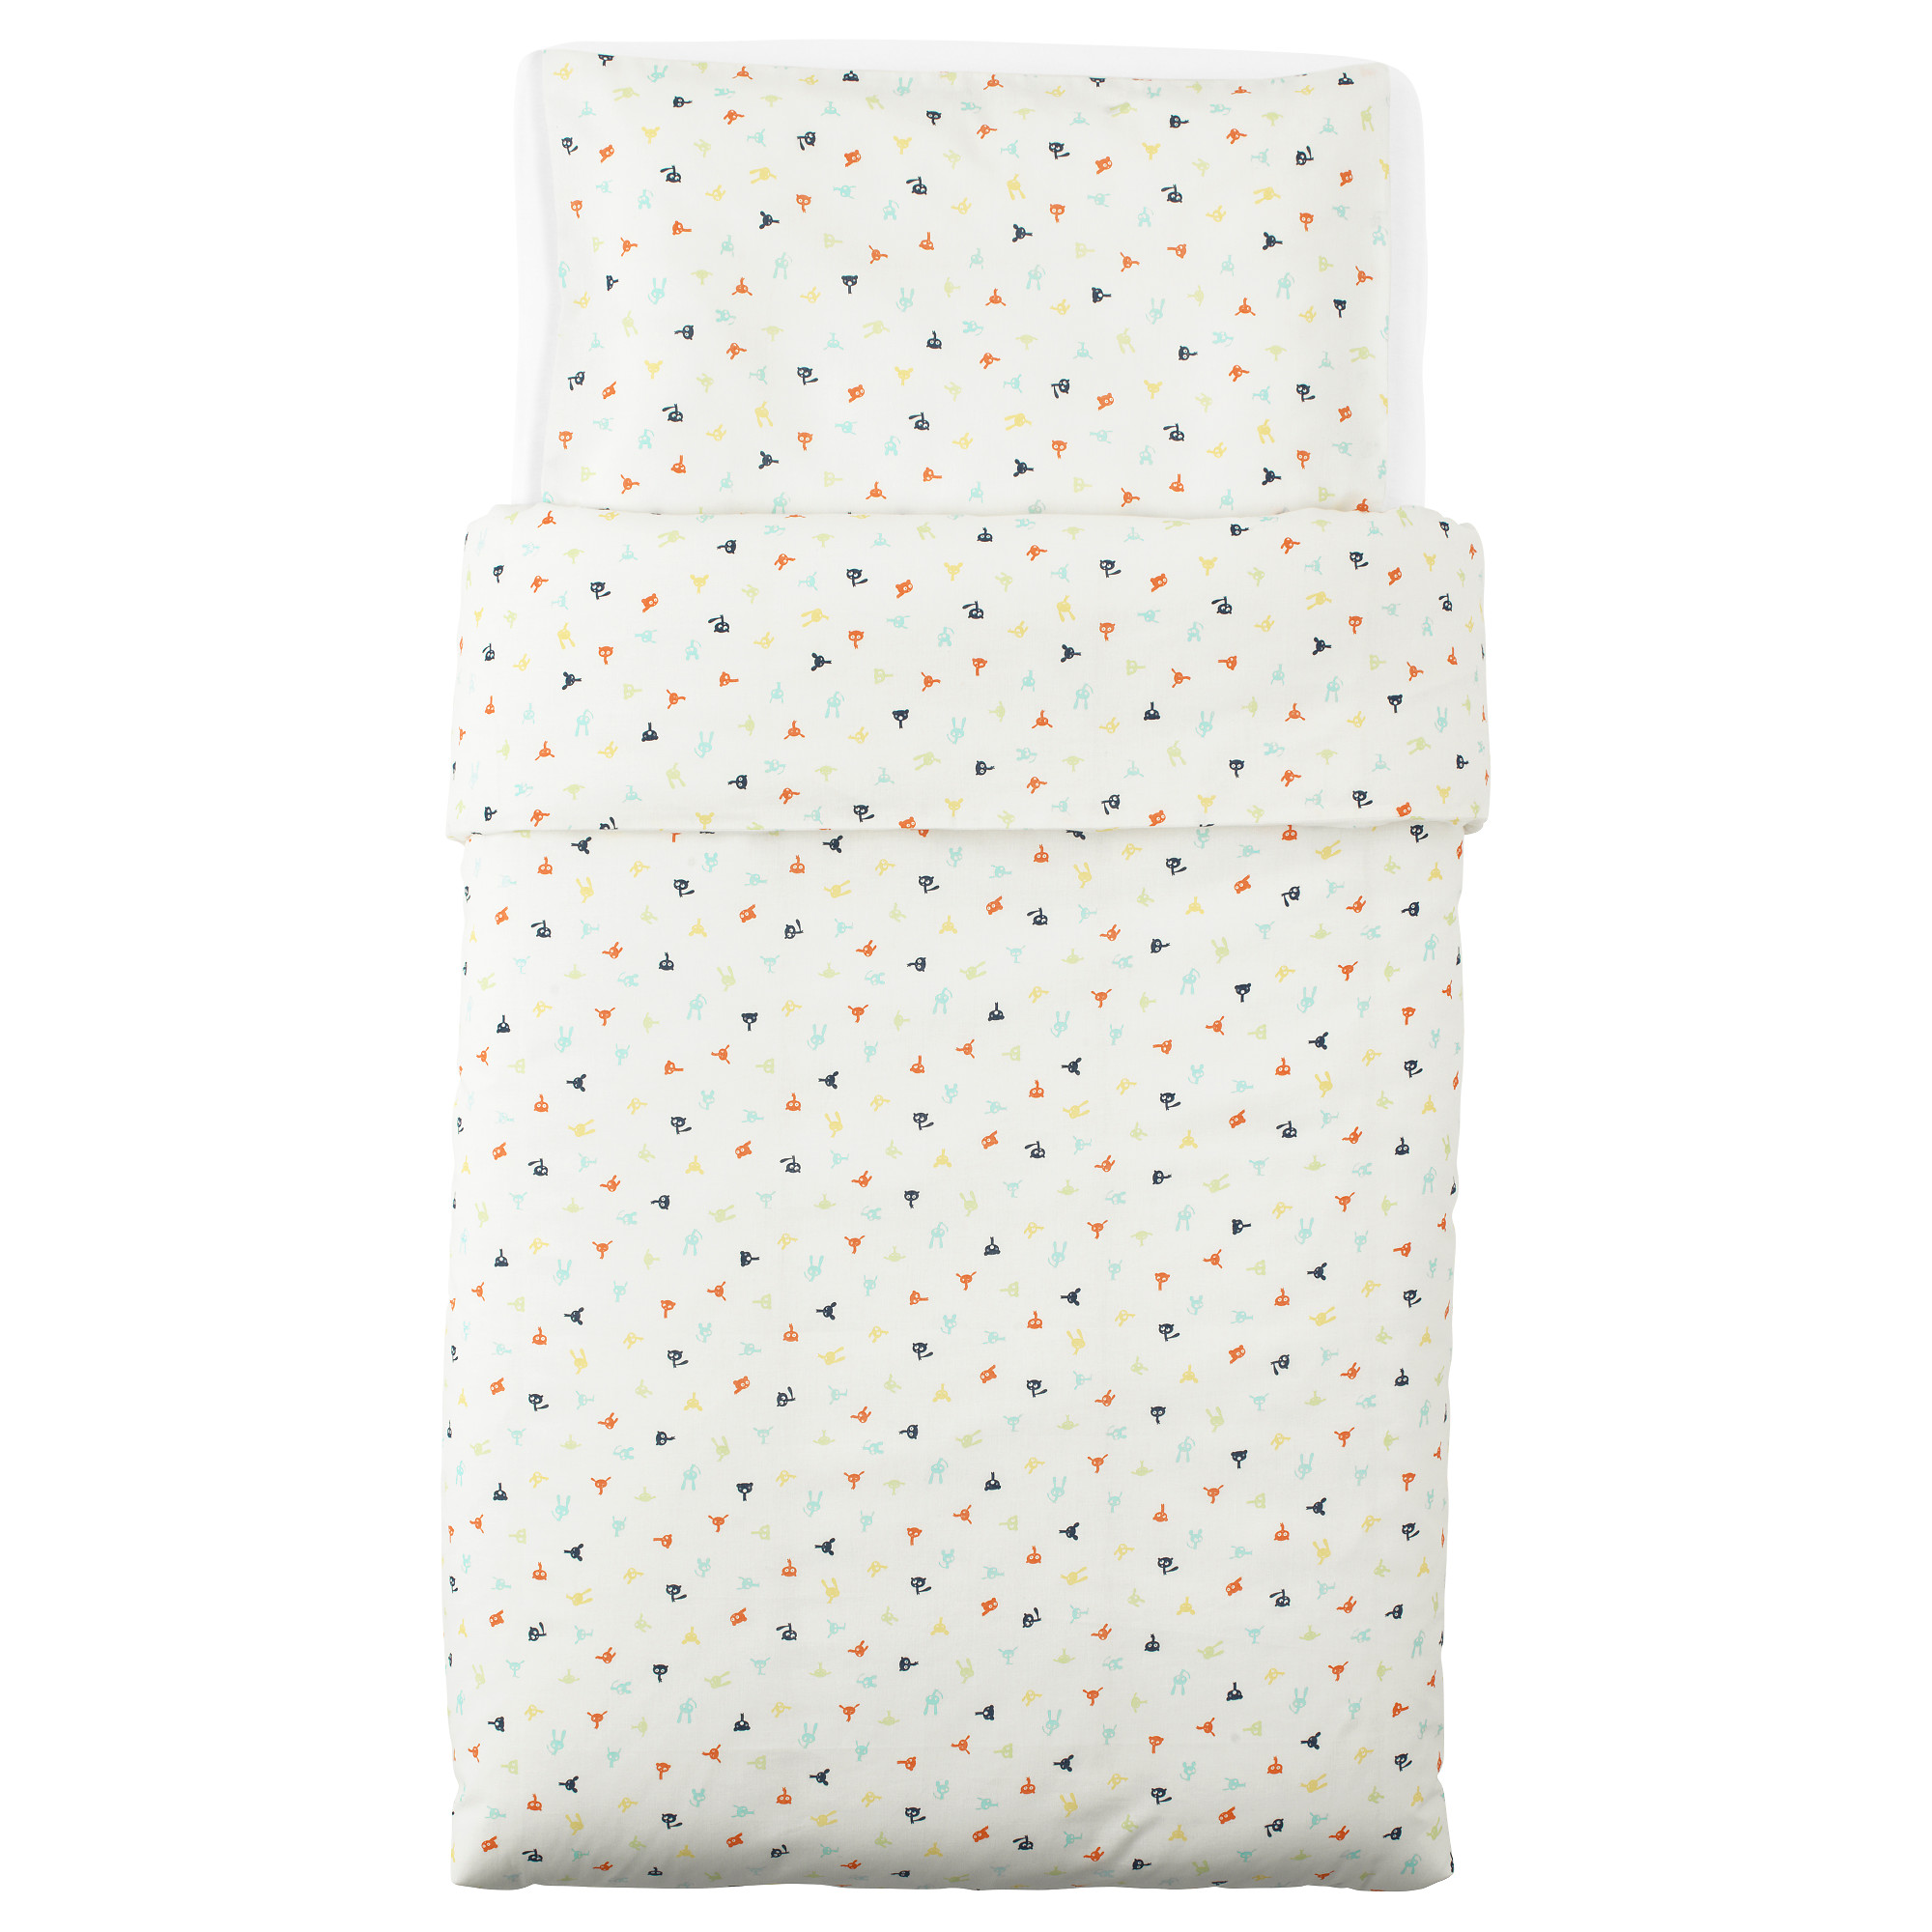 ikea cot quilt cover